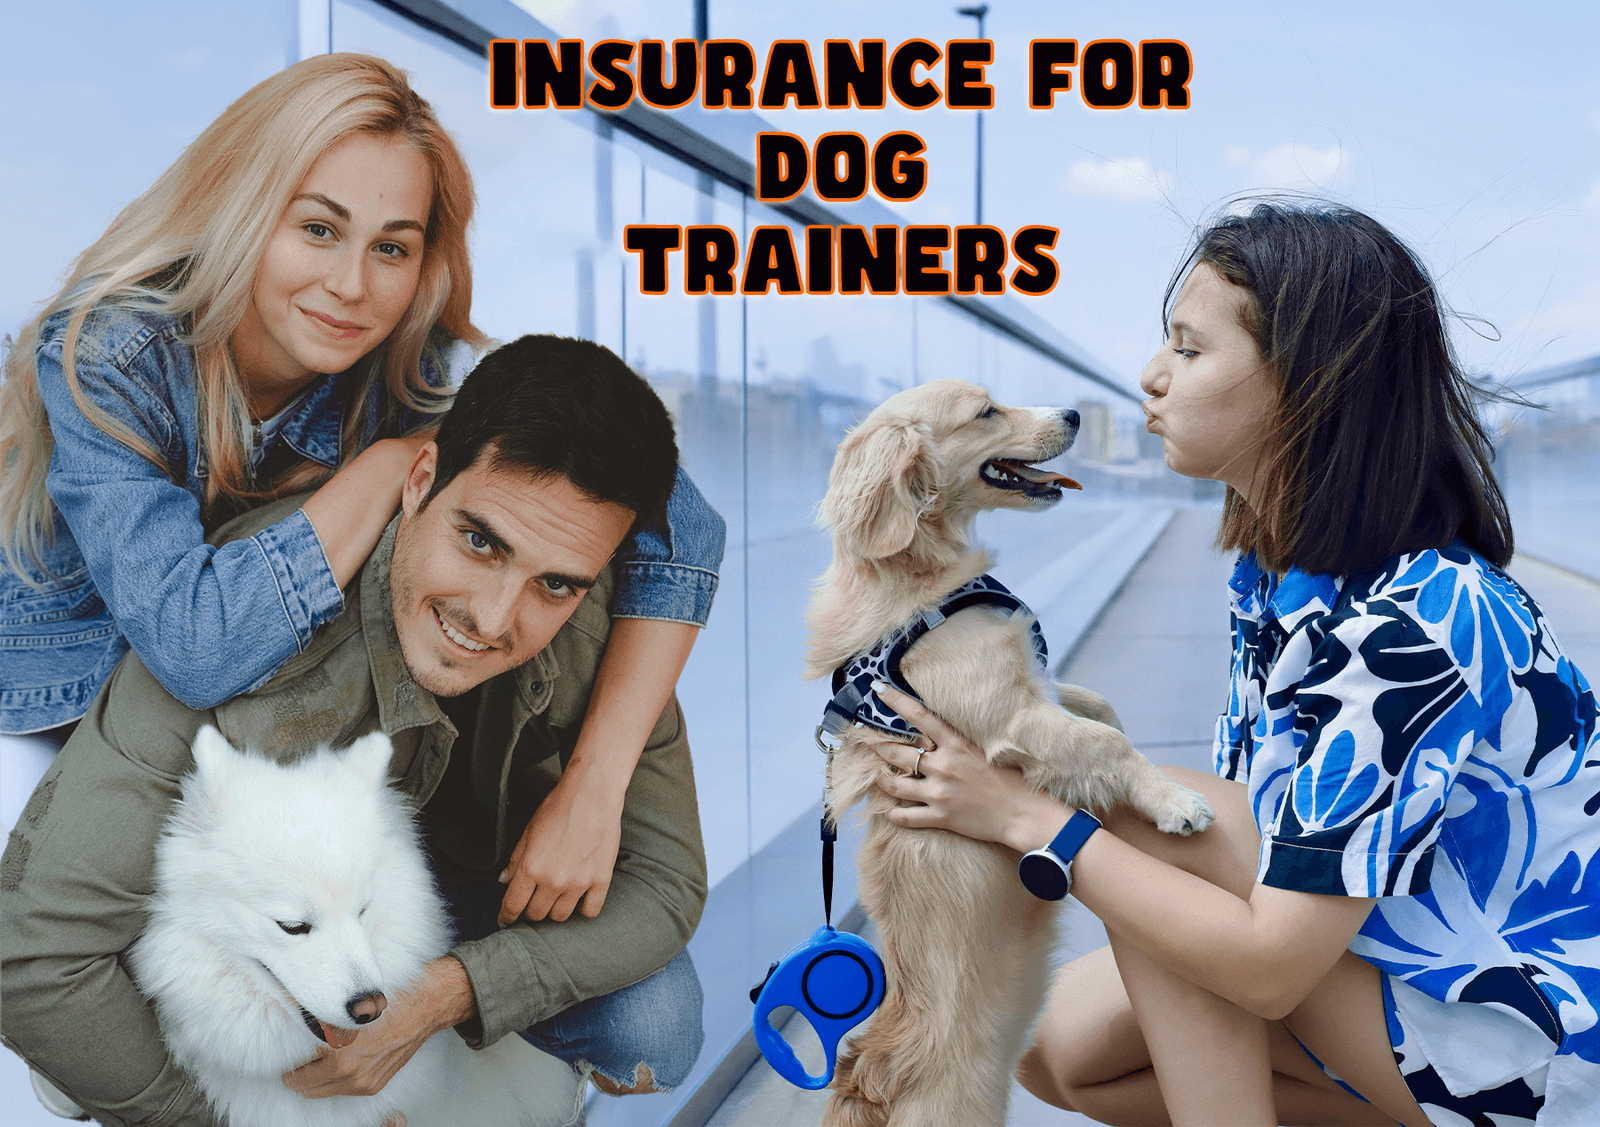 Insurance for Dog Trainers